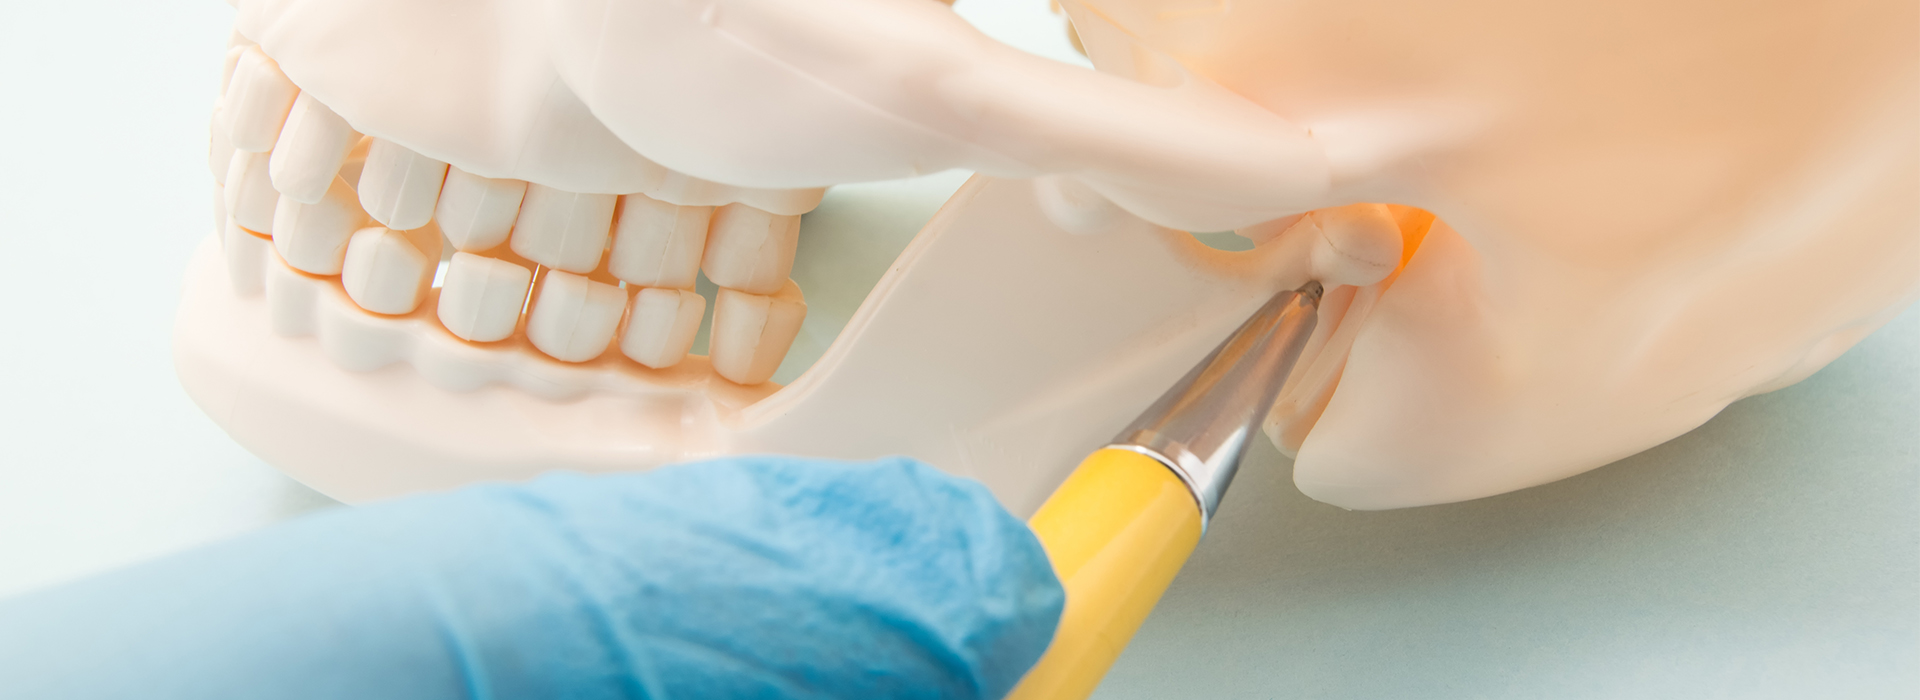 North Texas Dental Care | Periodontal Treatment, Veneers and Ceramic Crowns